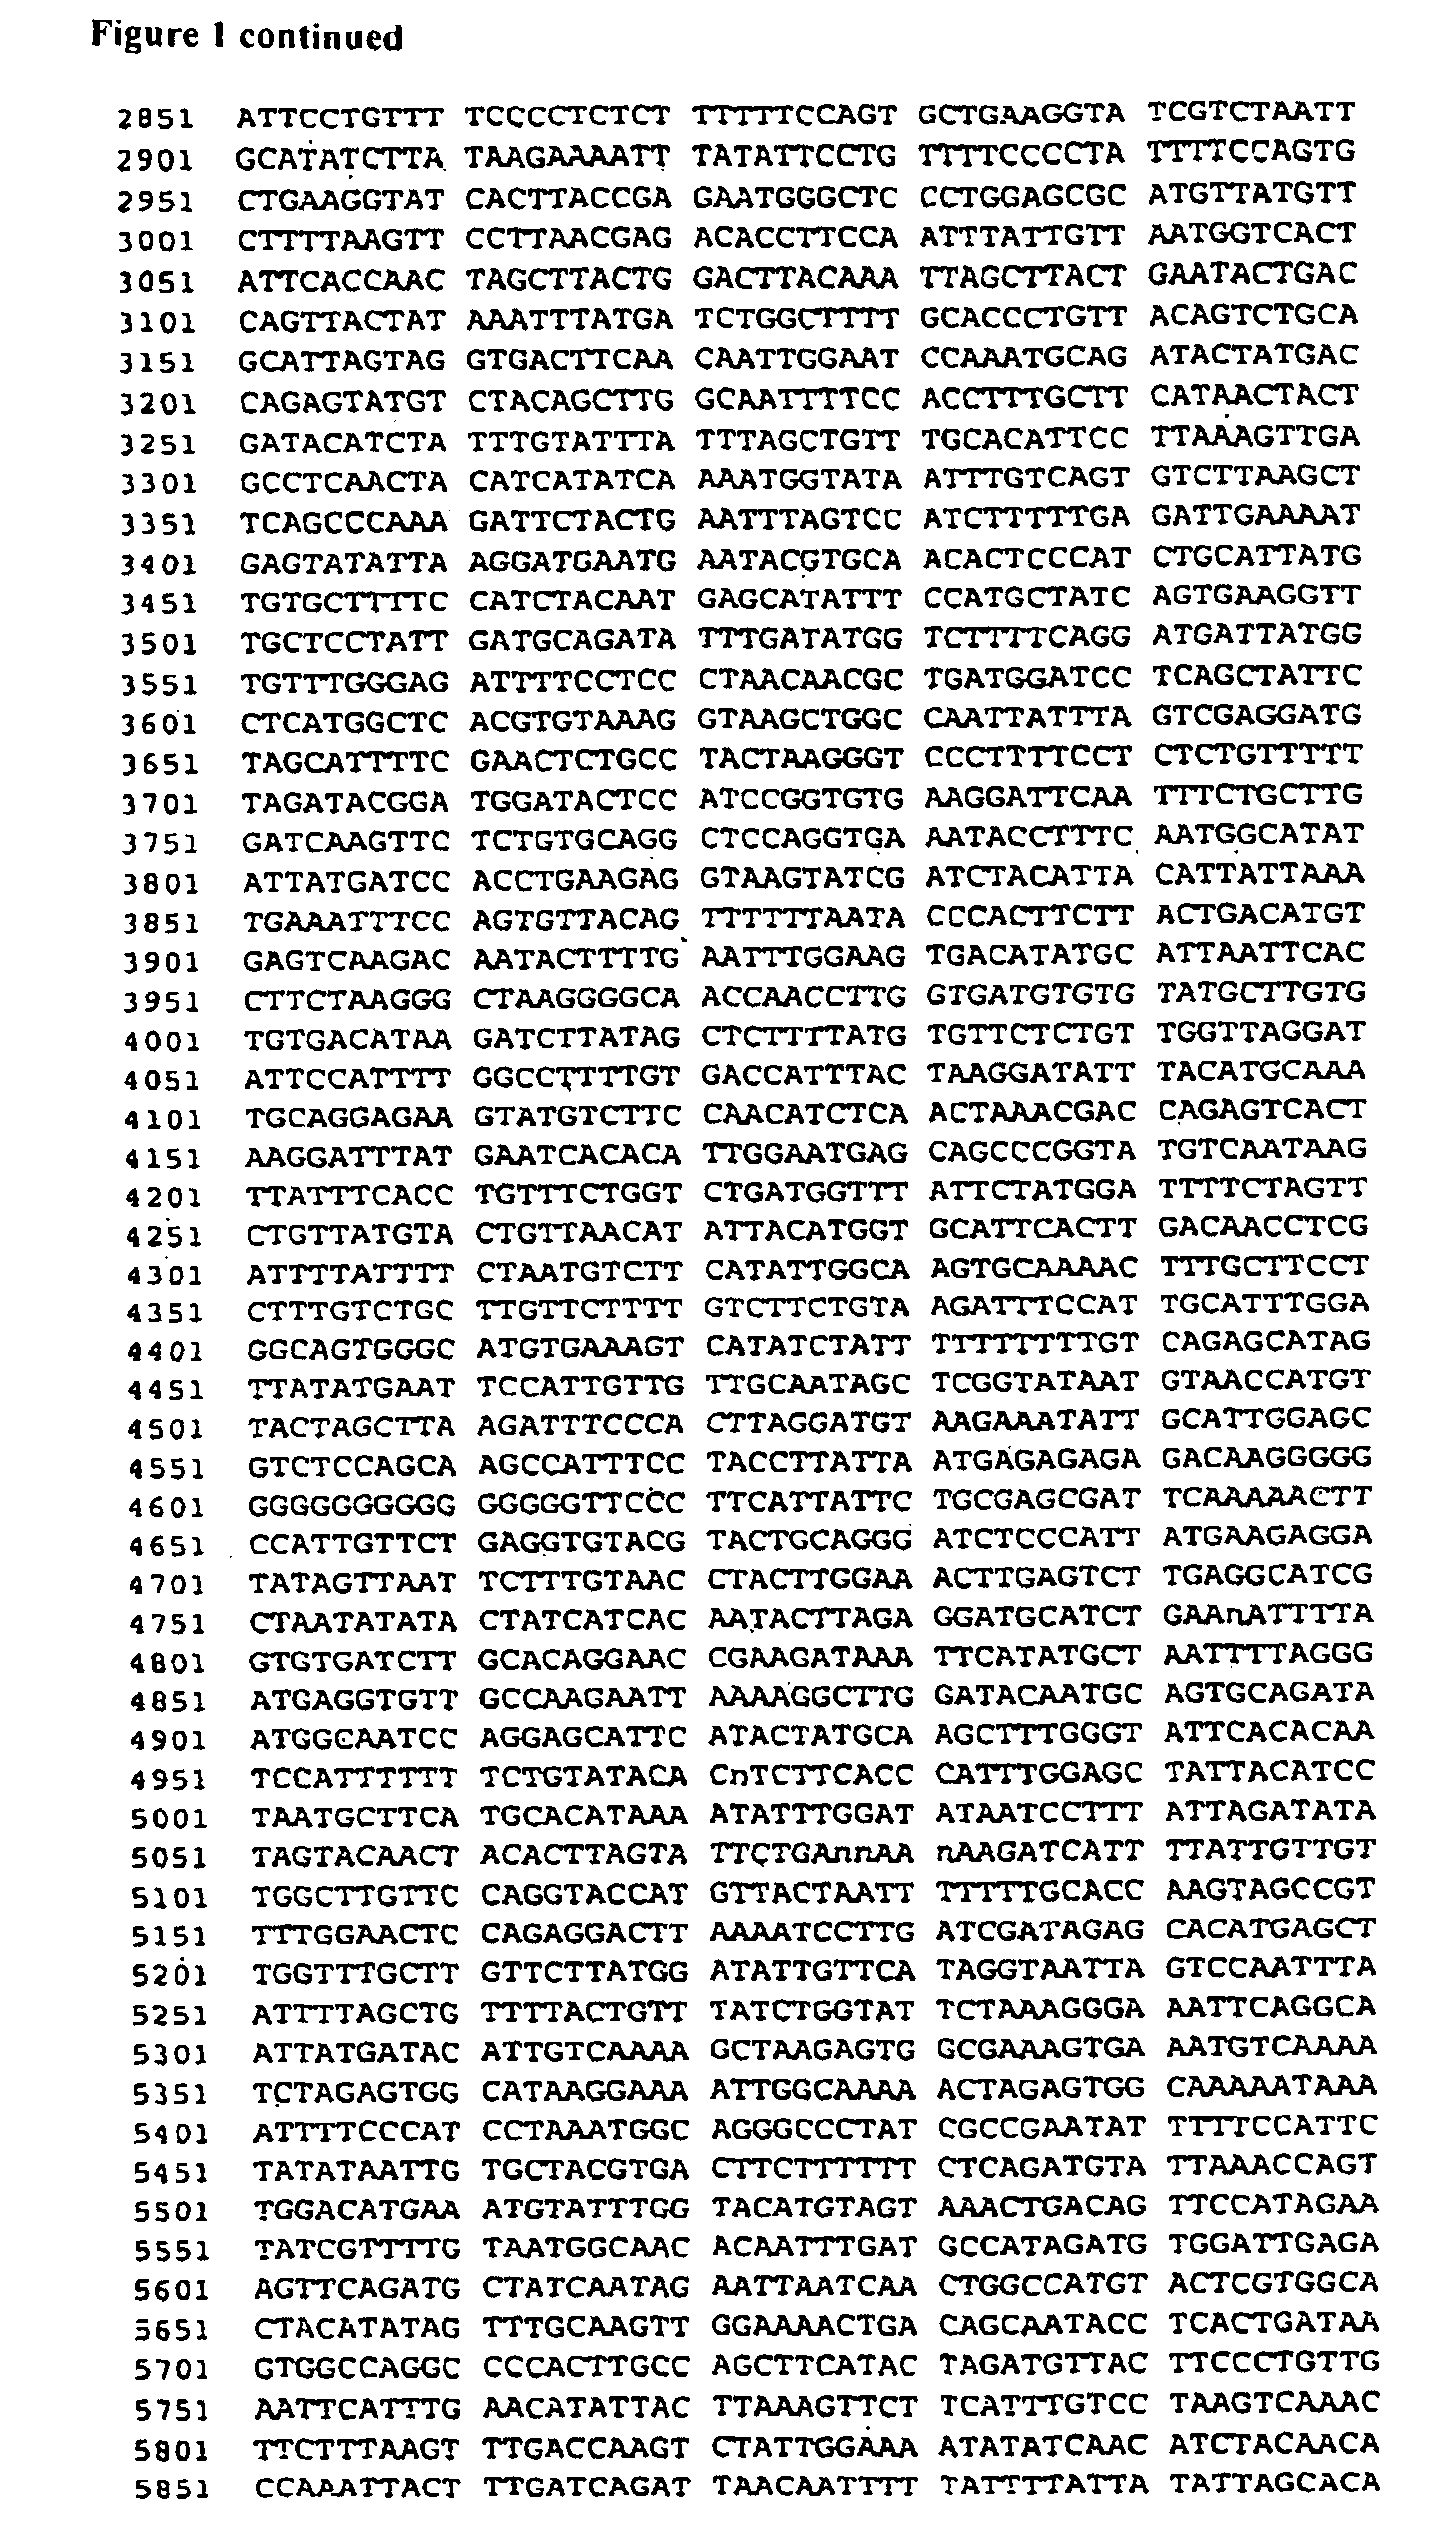 Wheat with altered branching enzyme activity and starch and starch containing products derived therefrom